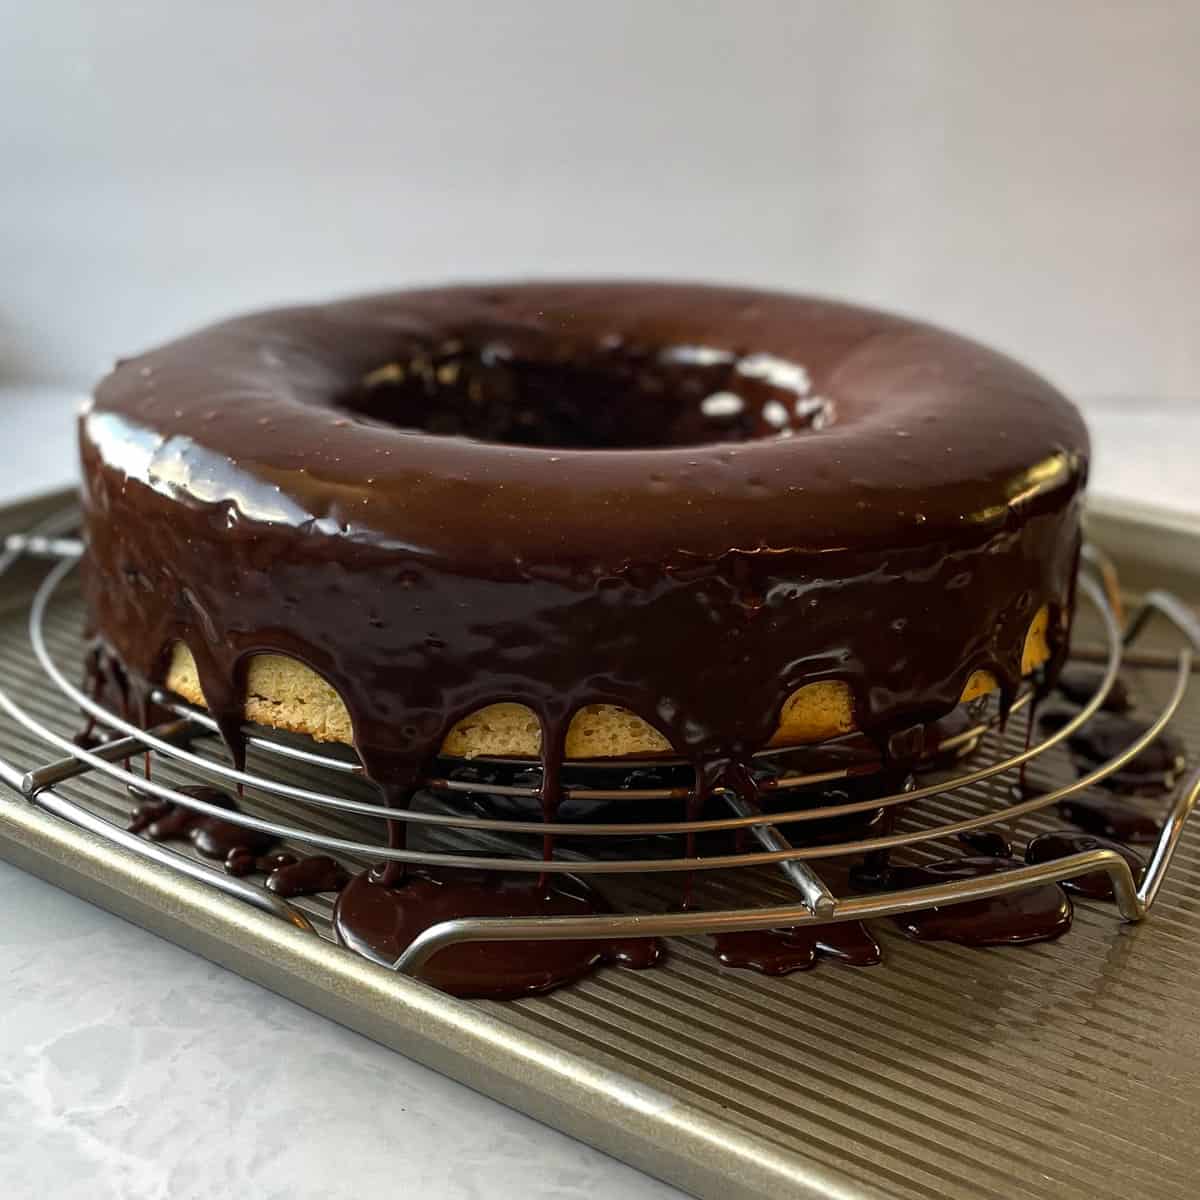 bundt cake dripping with a Nutella ganache on a cooling rack over a baking pan.